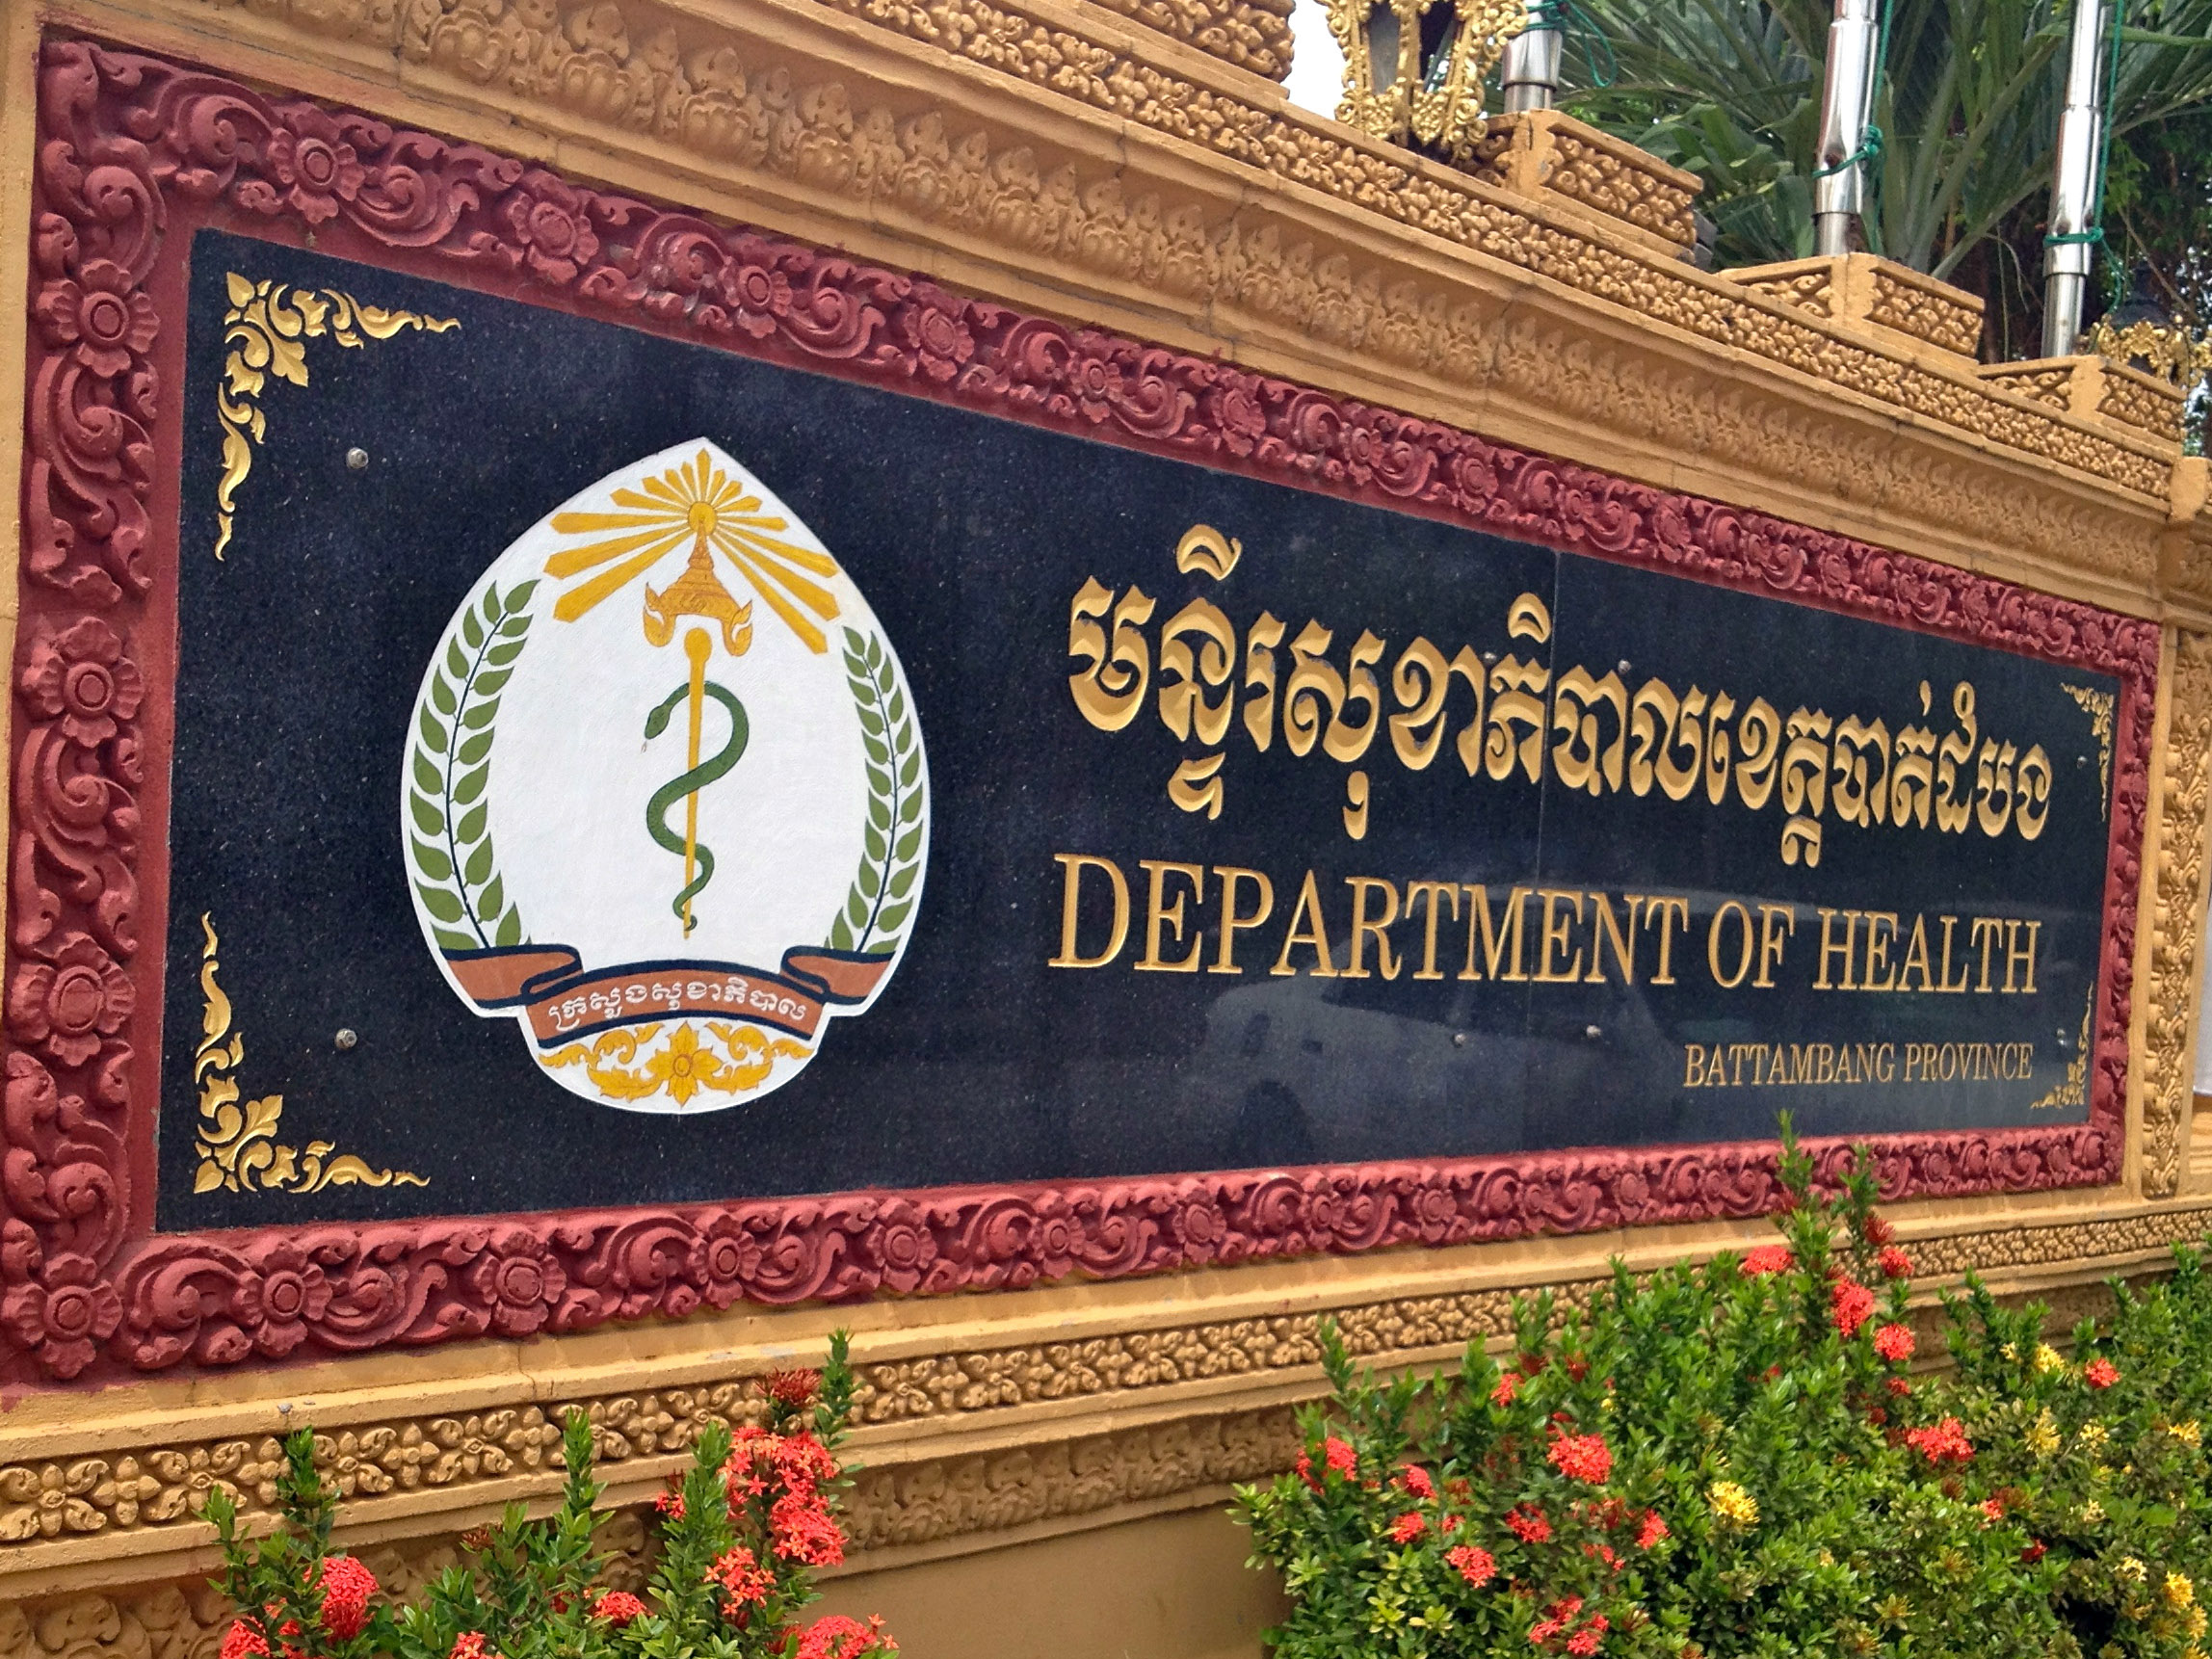 Sign of the department of health in Battampang province, Cambodia